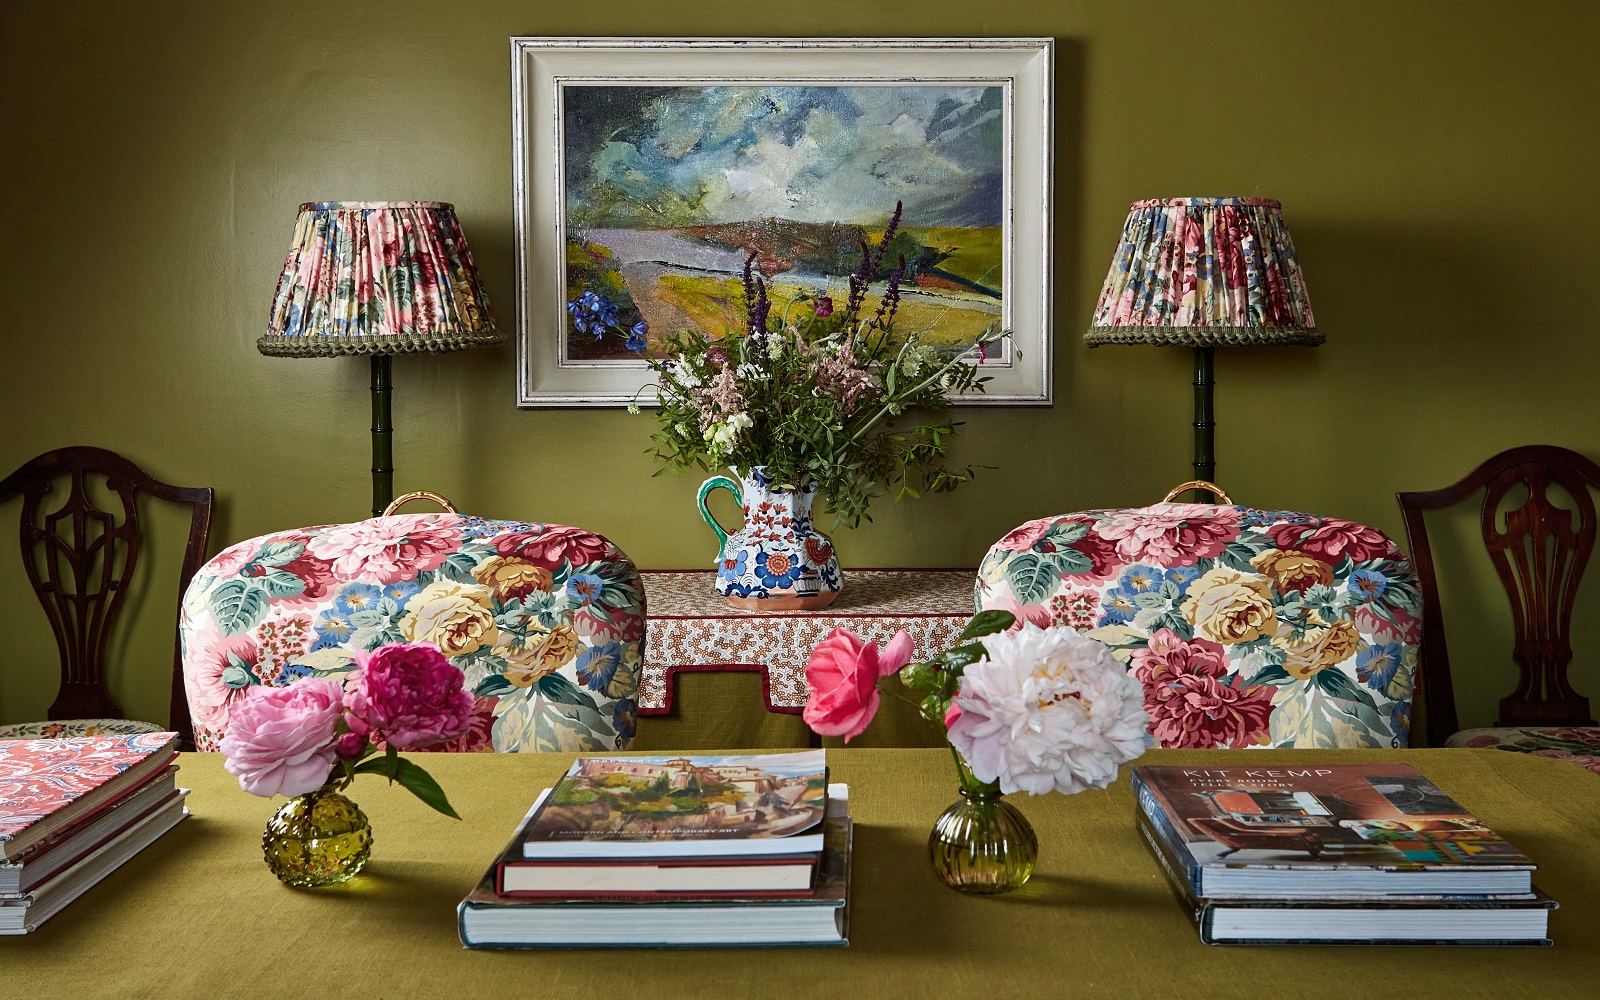 floral fabric on chairs behind desk and lampshades in florals with sanderson trim against olive green wall